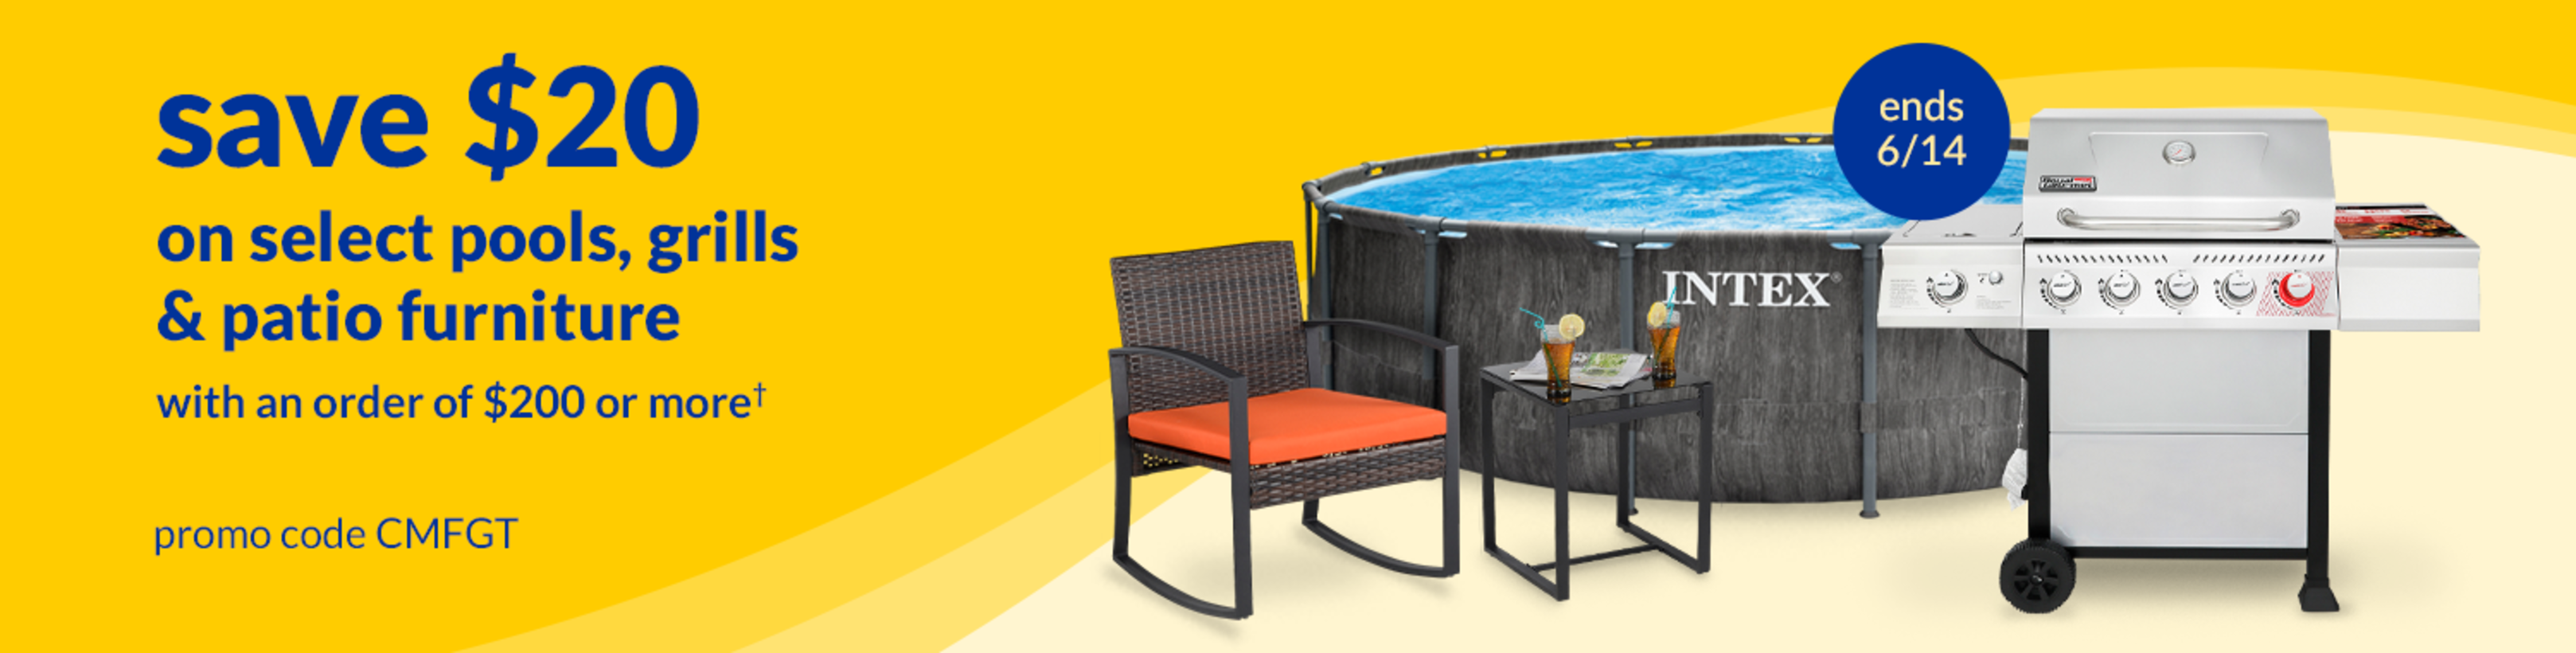 save $20 on select pools, grills & patio items with an order of $200 or more* ends 6/13 promo code CMFGT